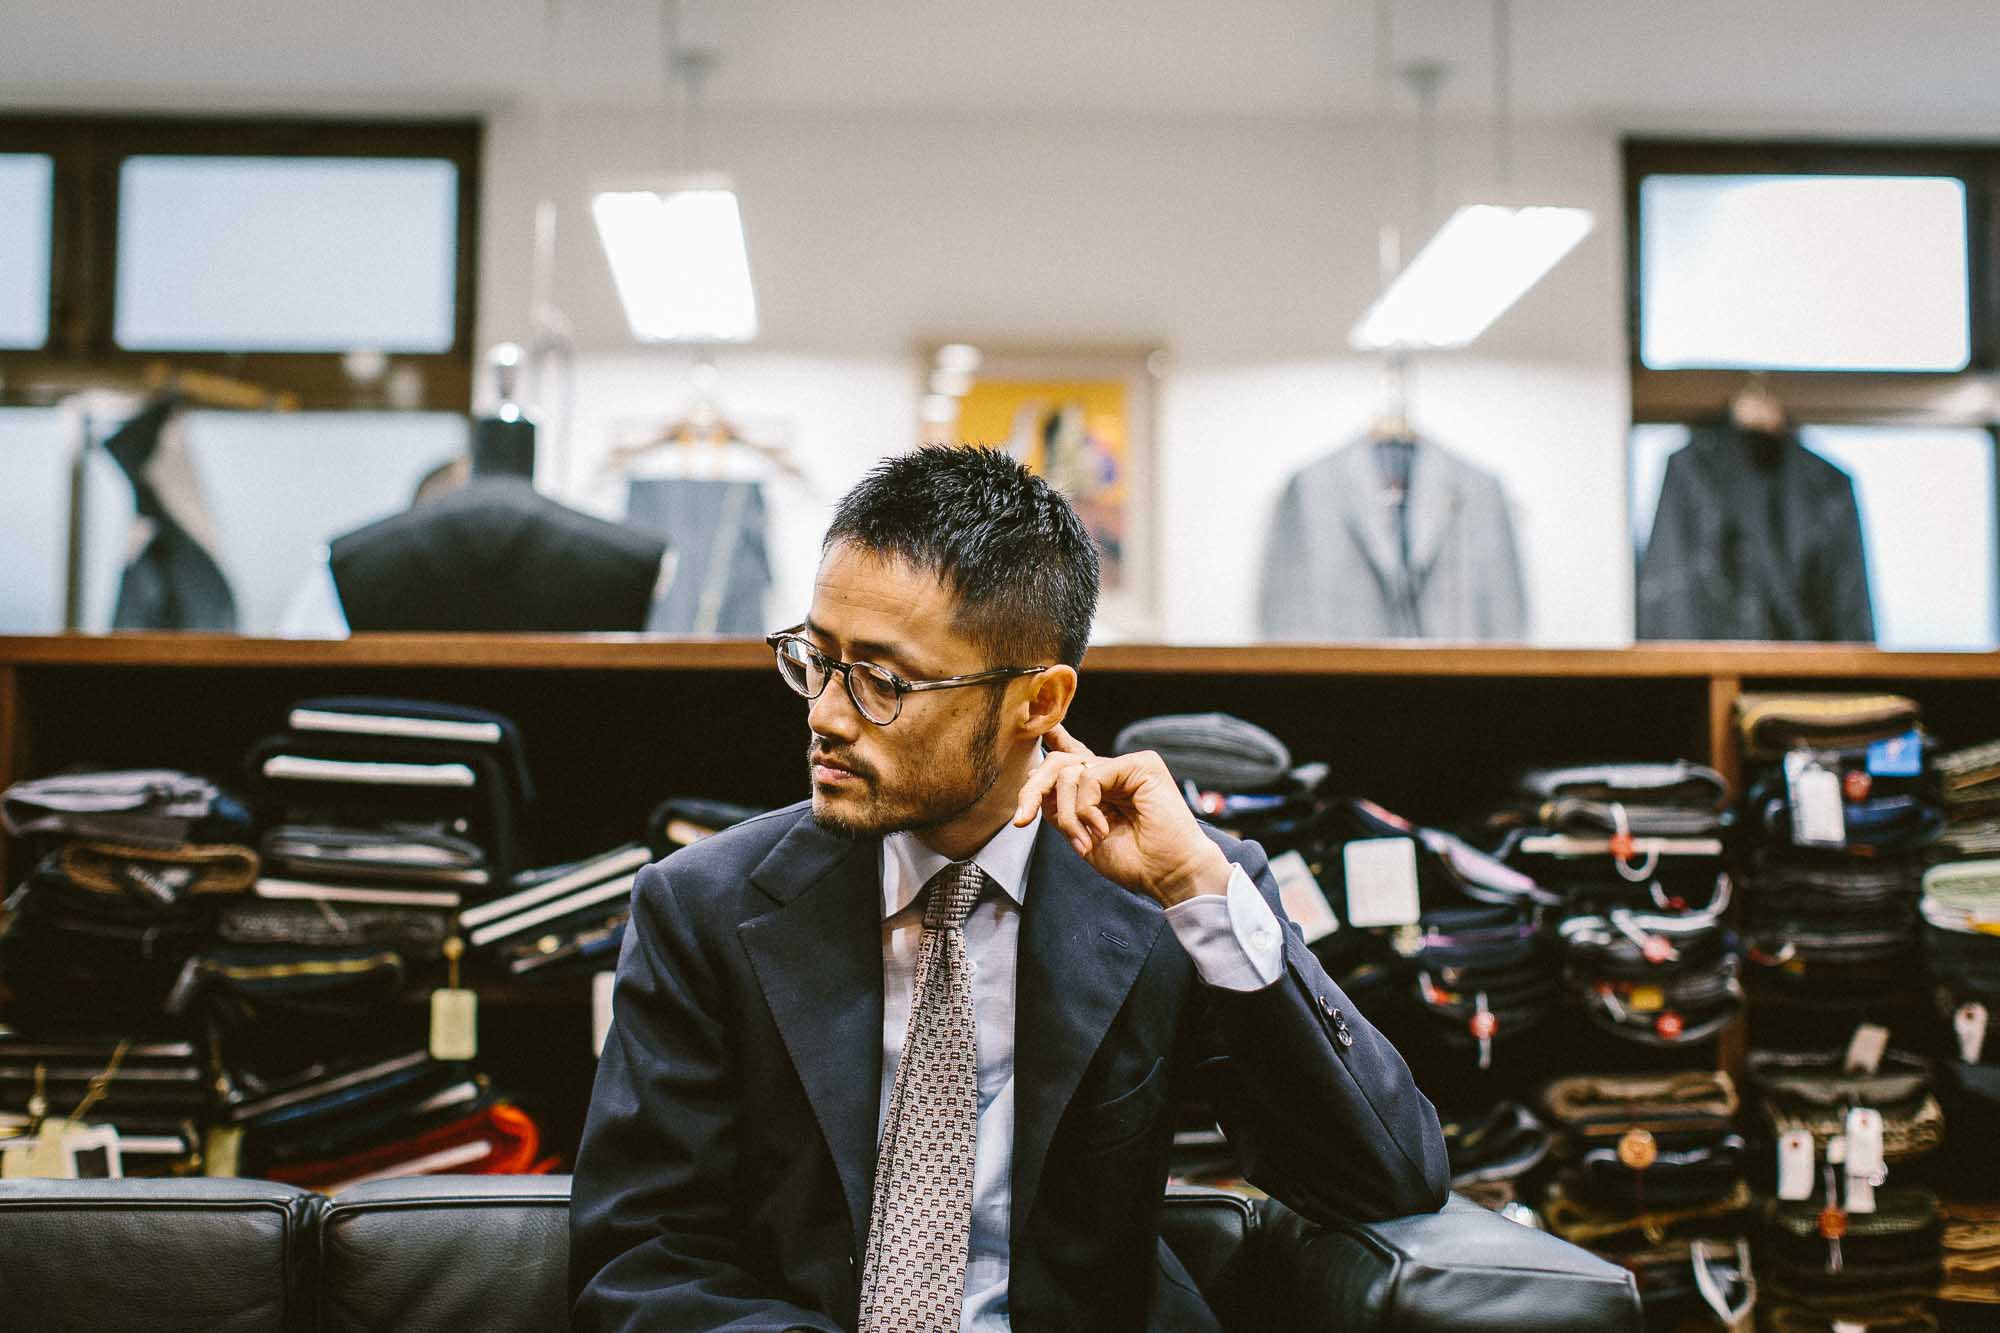 traditional japanese suits for men